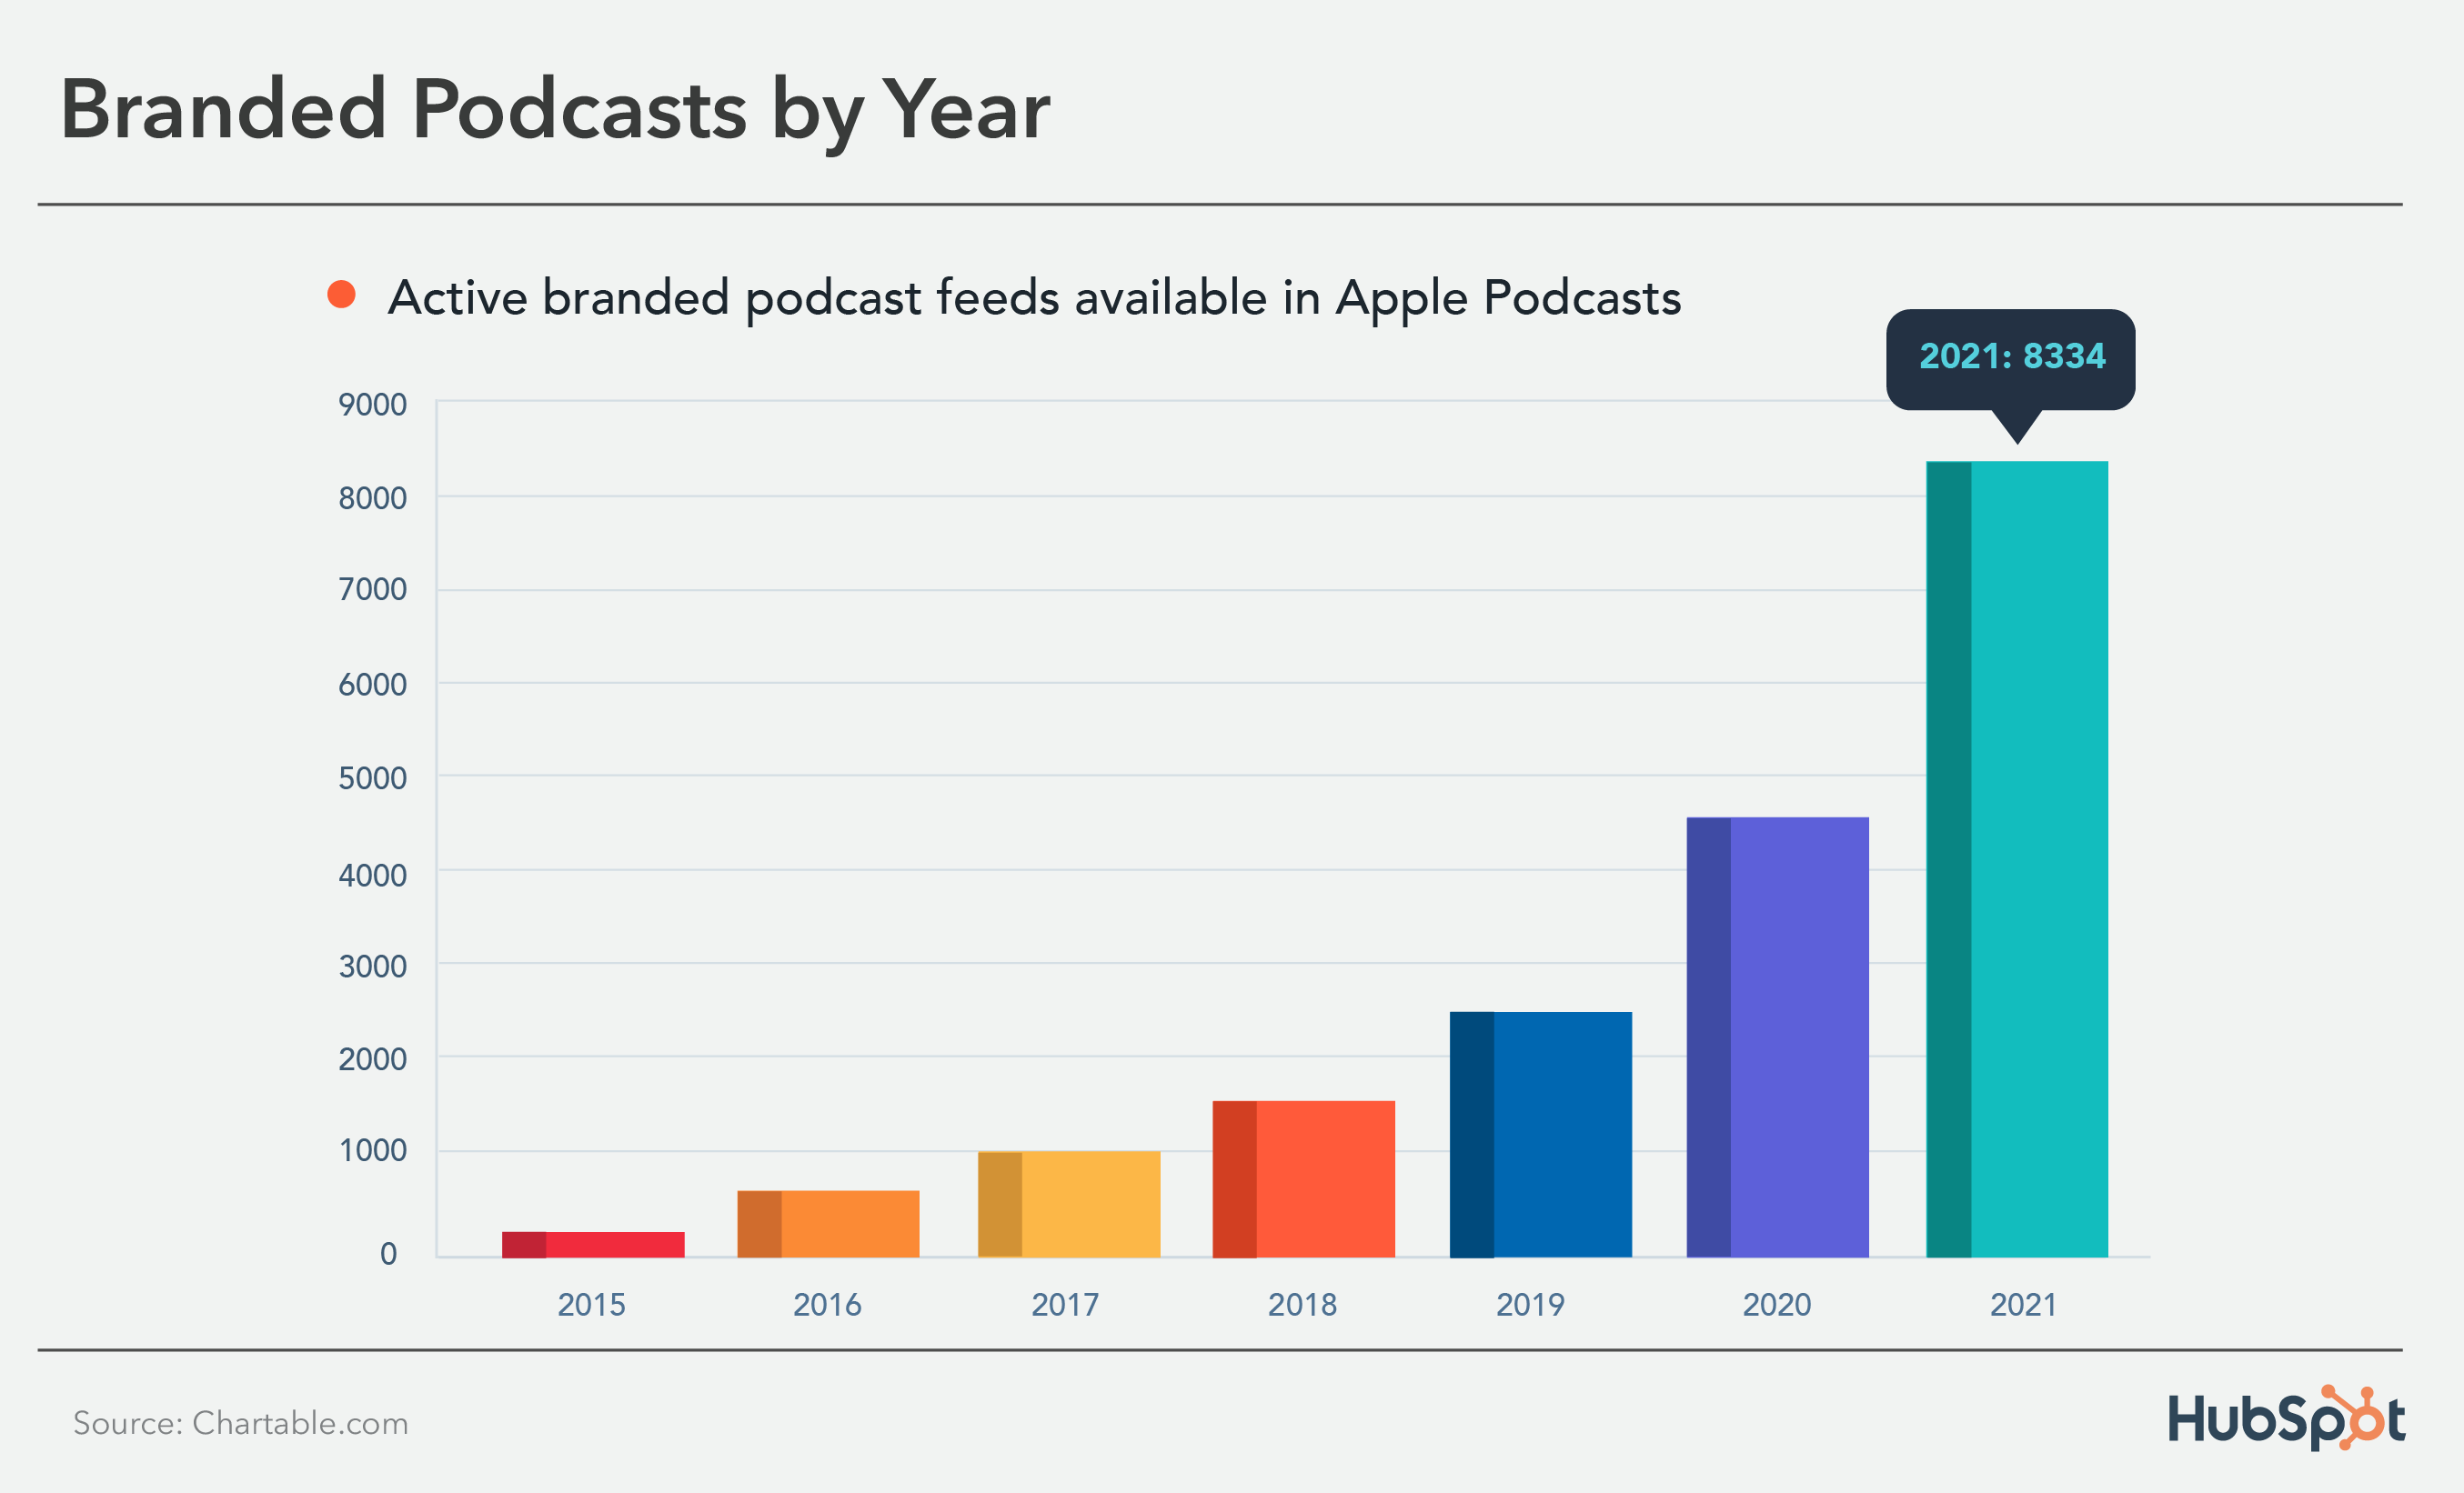 Podcast Stats: Number of branded podcasts per year